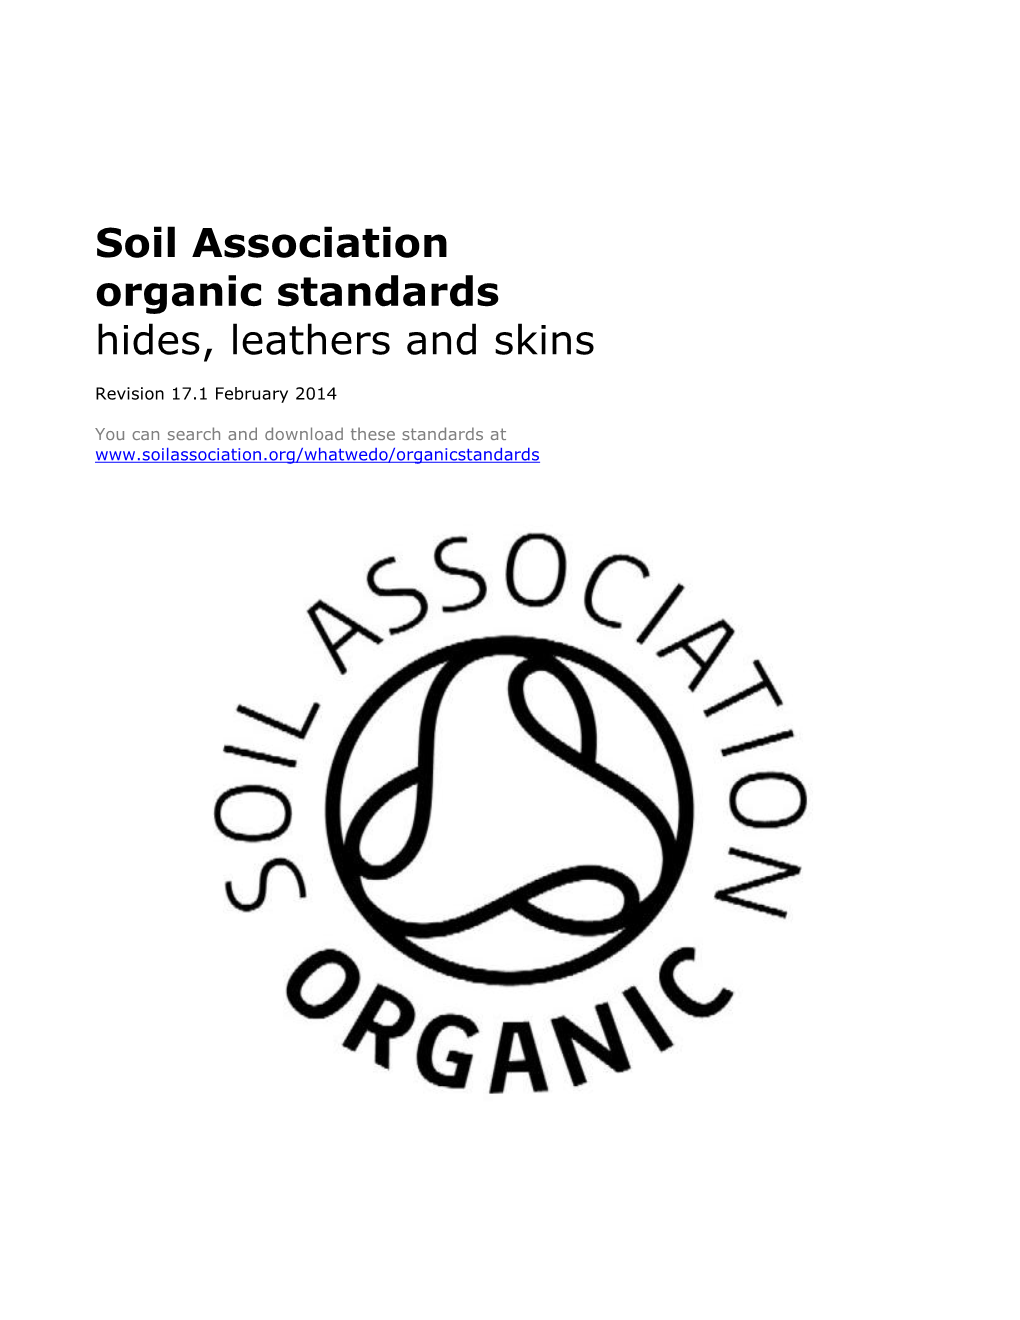 Soil Association Organic Standards Hides, Leathers and Skins